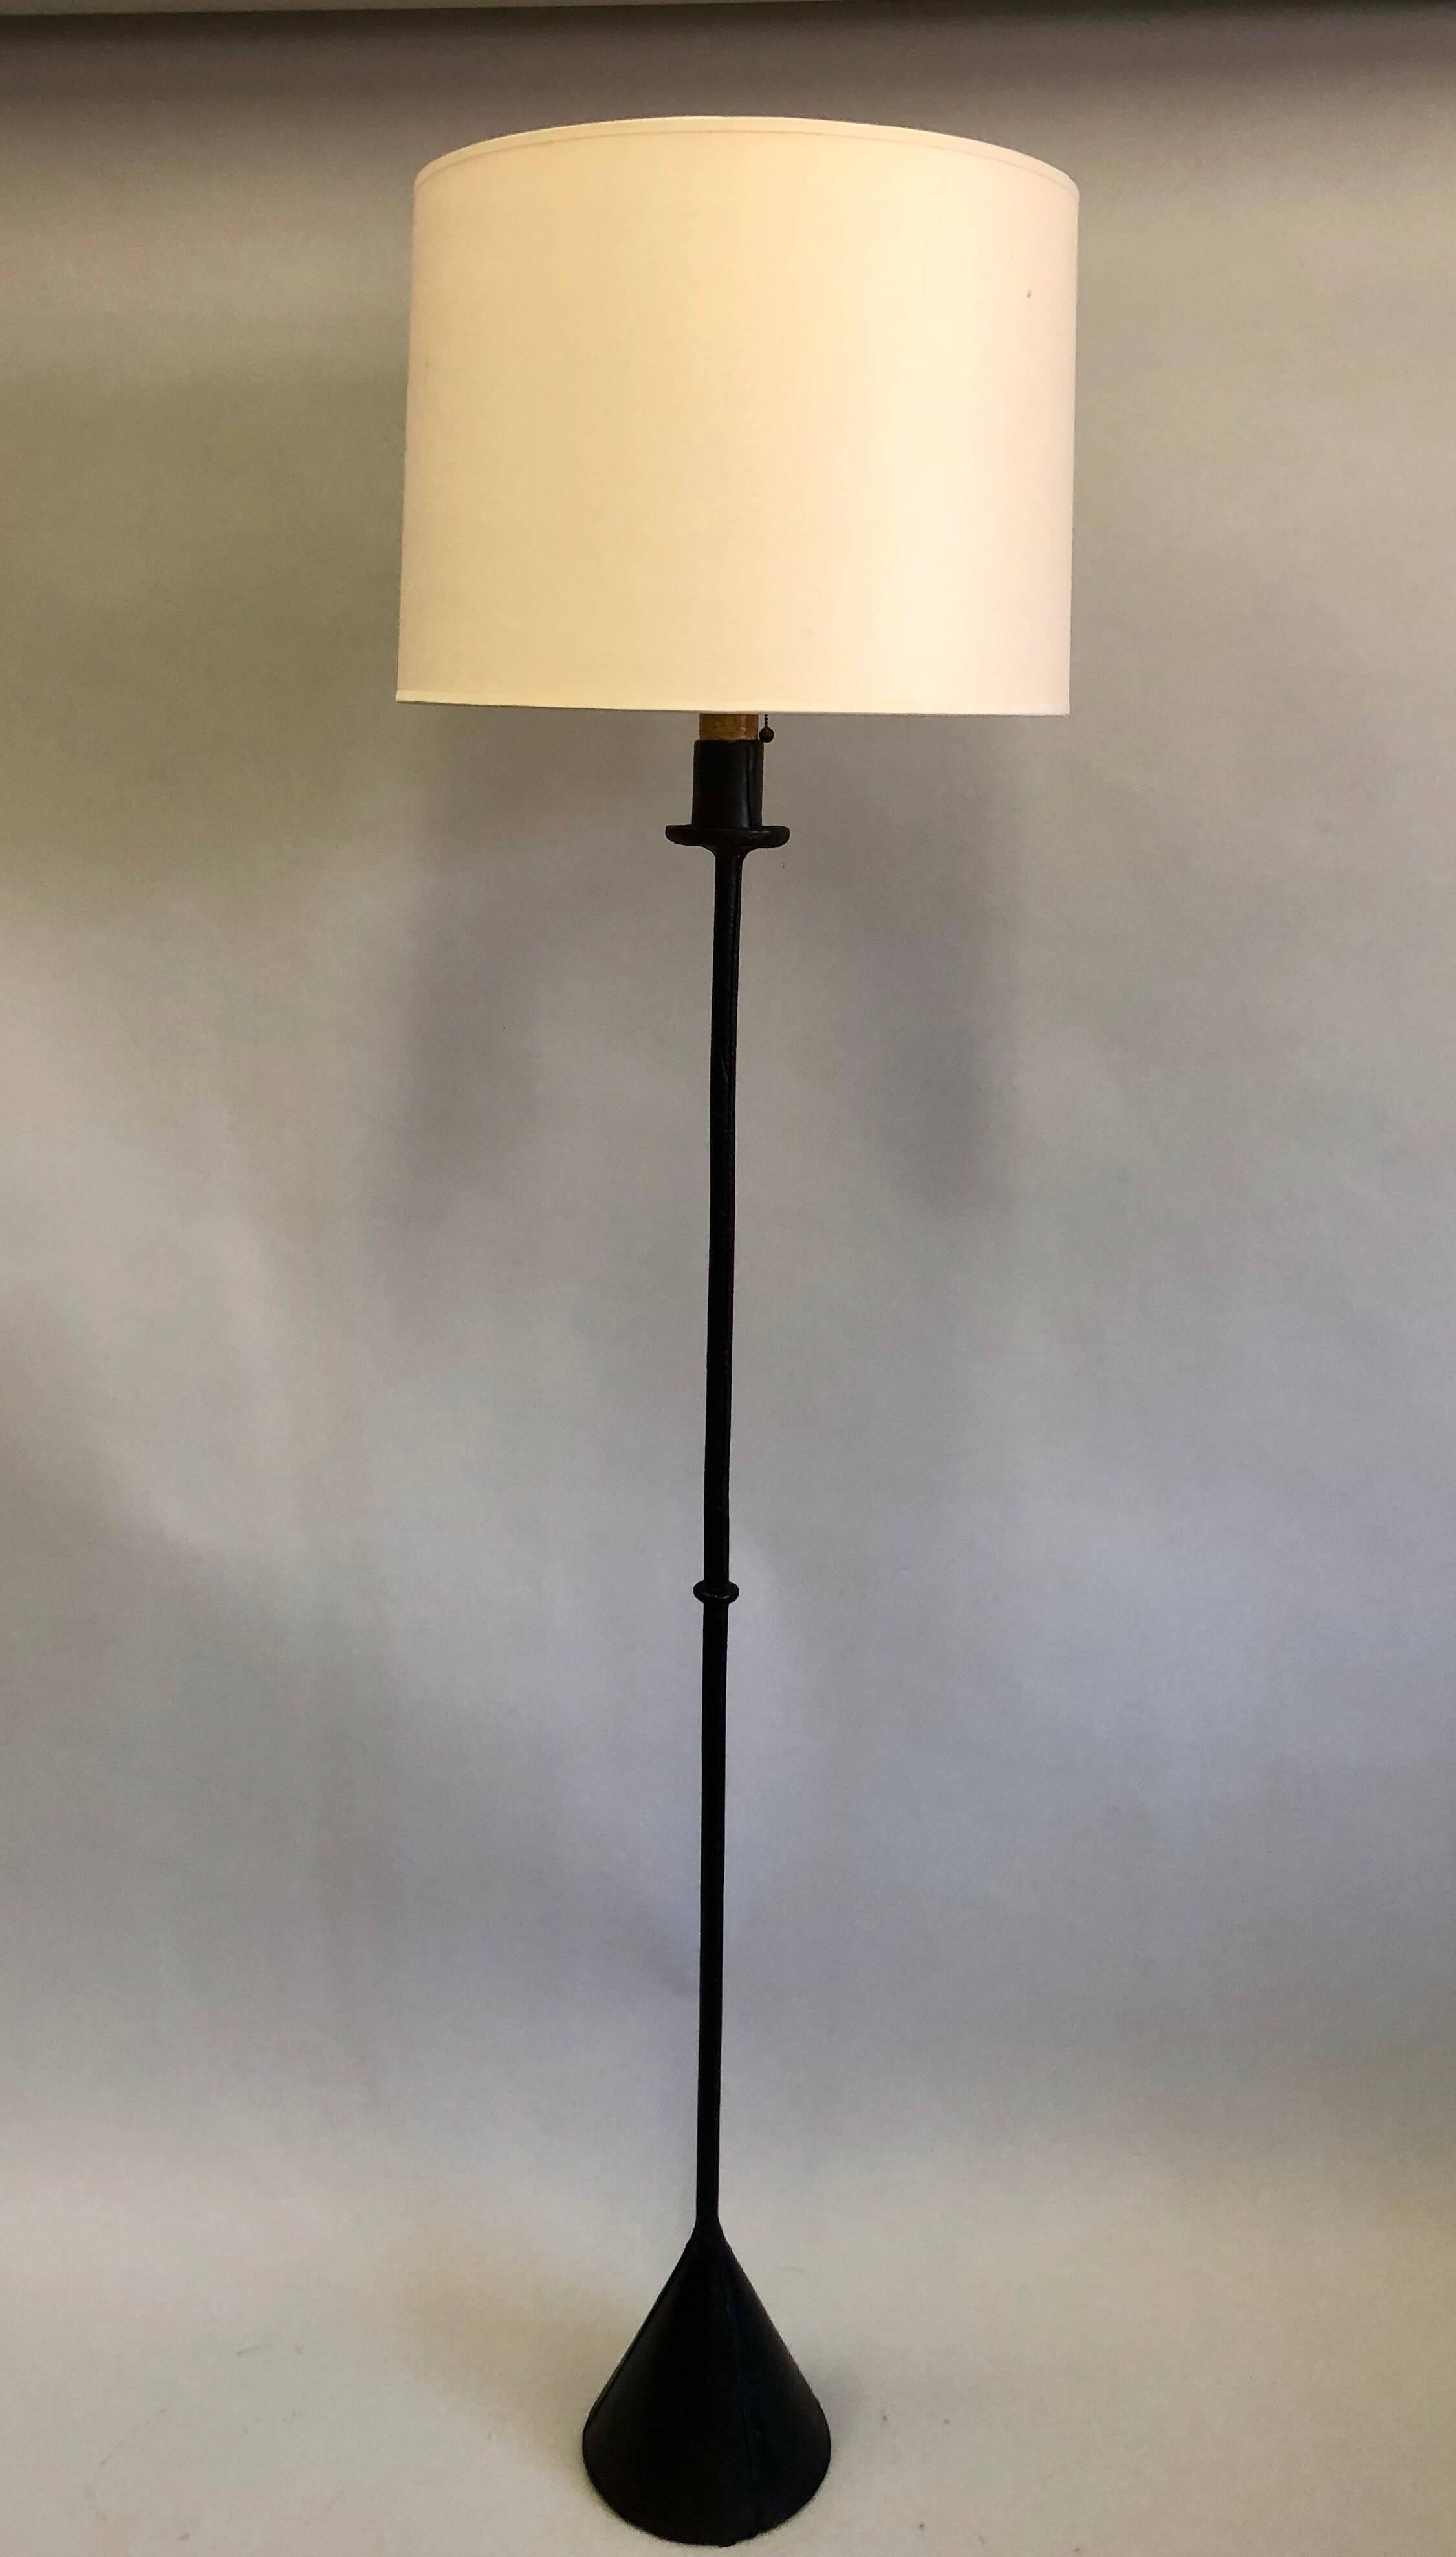 Elegant pair of French Mid-Century Modern handstitched black leather floor lamps by Jacques Adnet, 1940-1950.

The standing lamps have a dramatic cone base. Black leather is wrapped around base and stem and is handstitched. 

Base diameter is 8